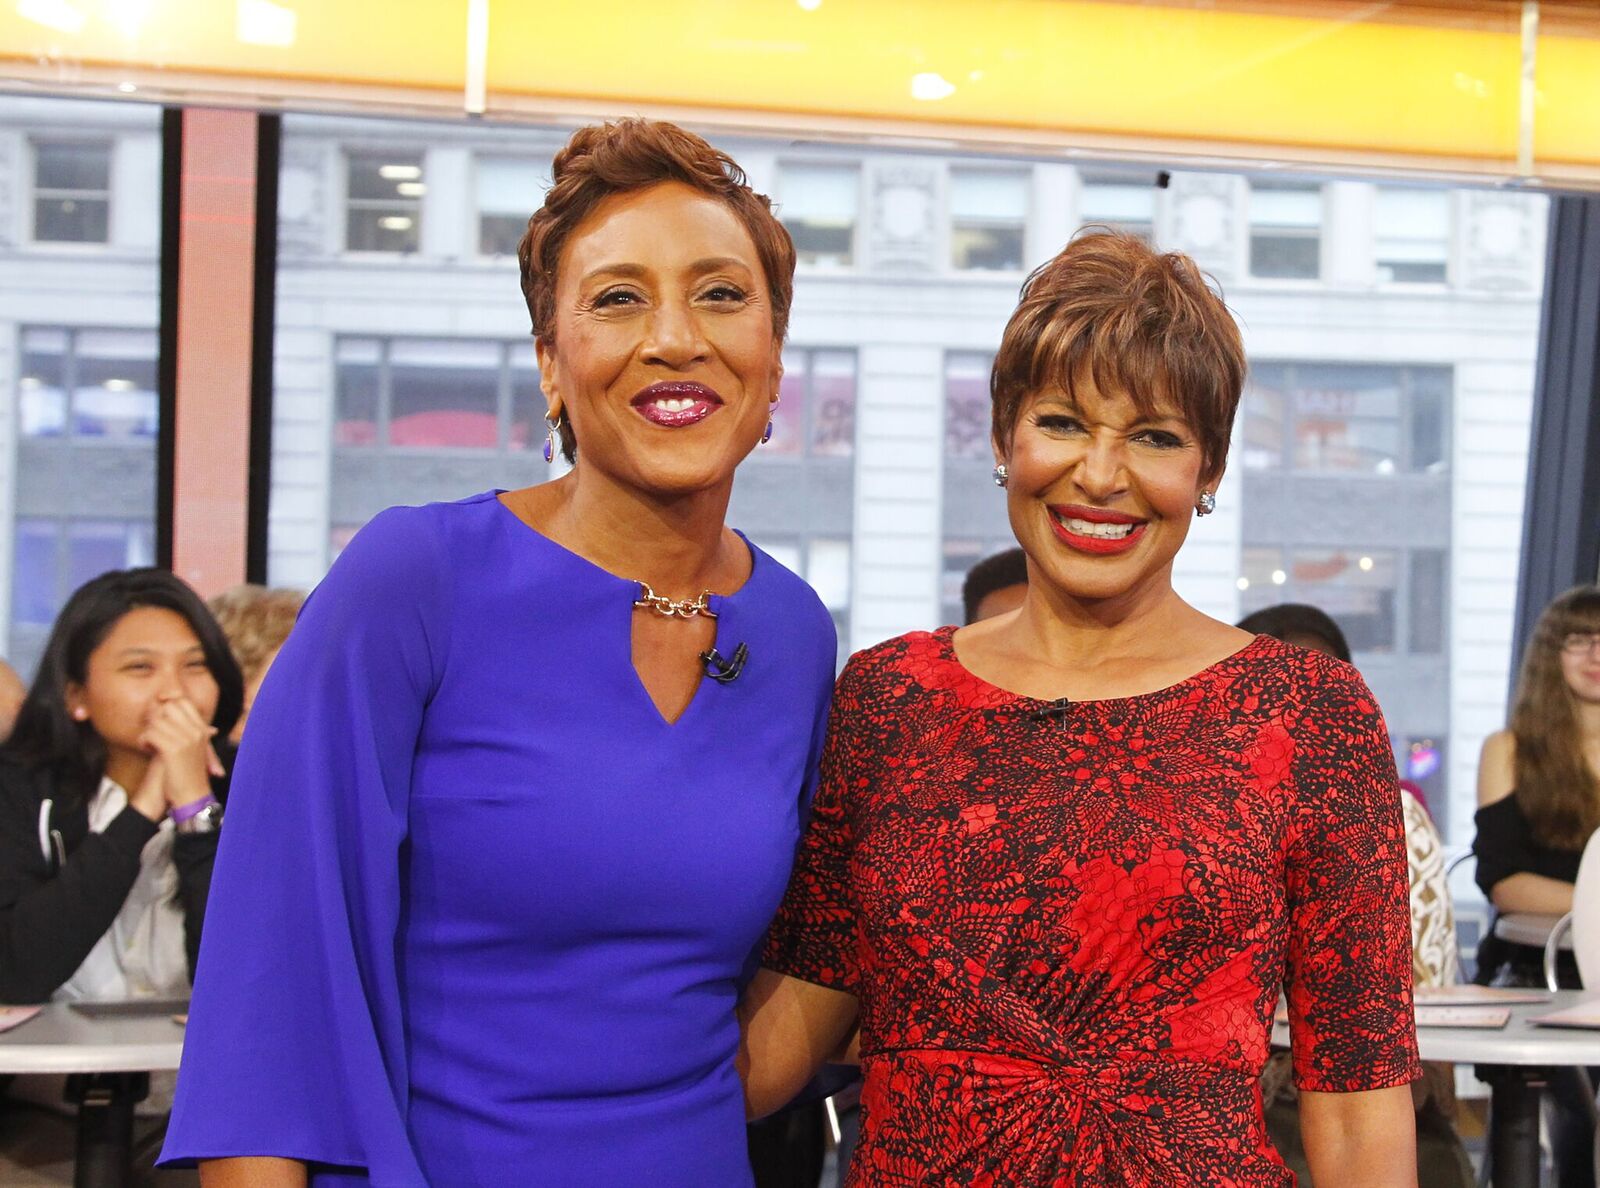 Robin Roberts and sister Sally-Ann celebrate her 5th birthday, which commemorates the day she received a lifesaving bone-marrow transplant to treat MDS on "Good Morning America," Wednesday, September 20, 2017 | Photo: Getty Images